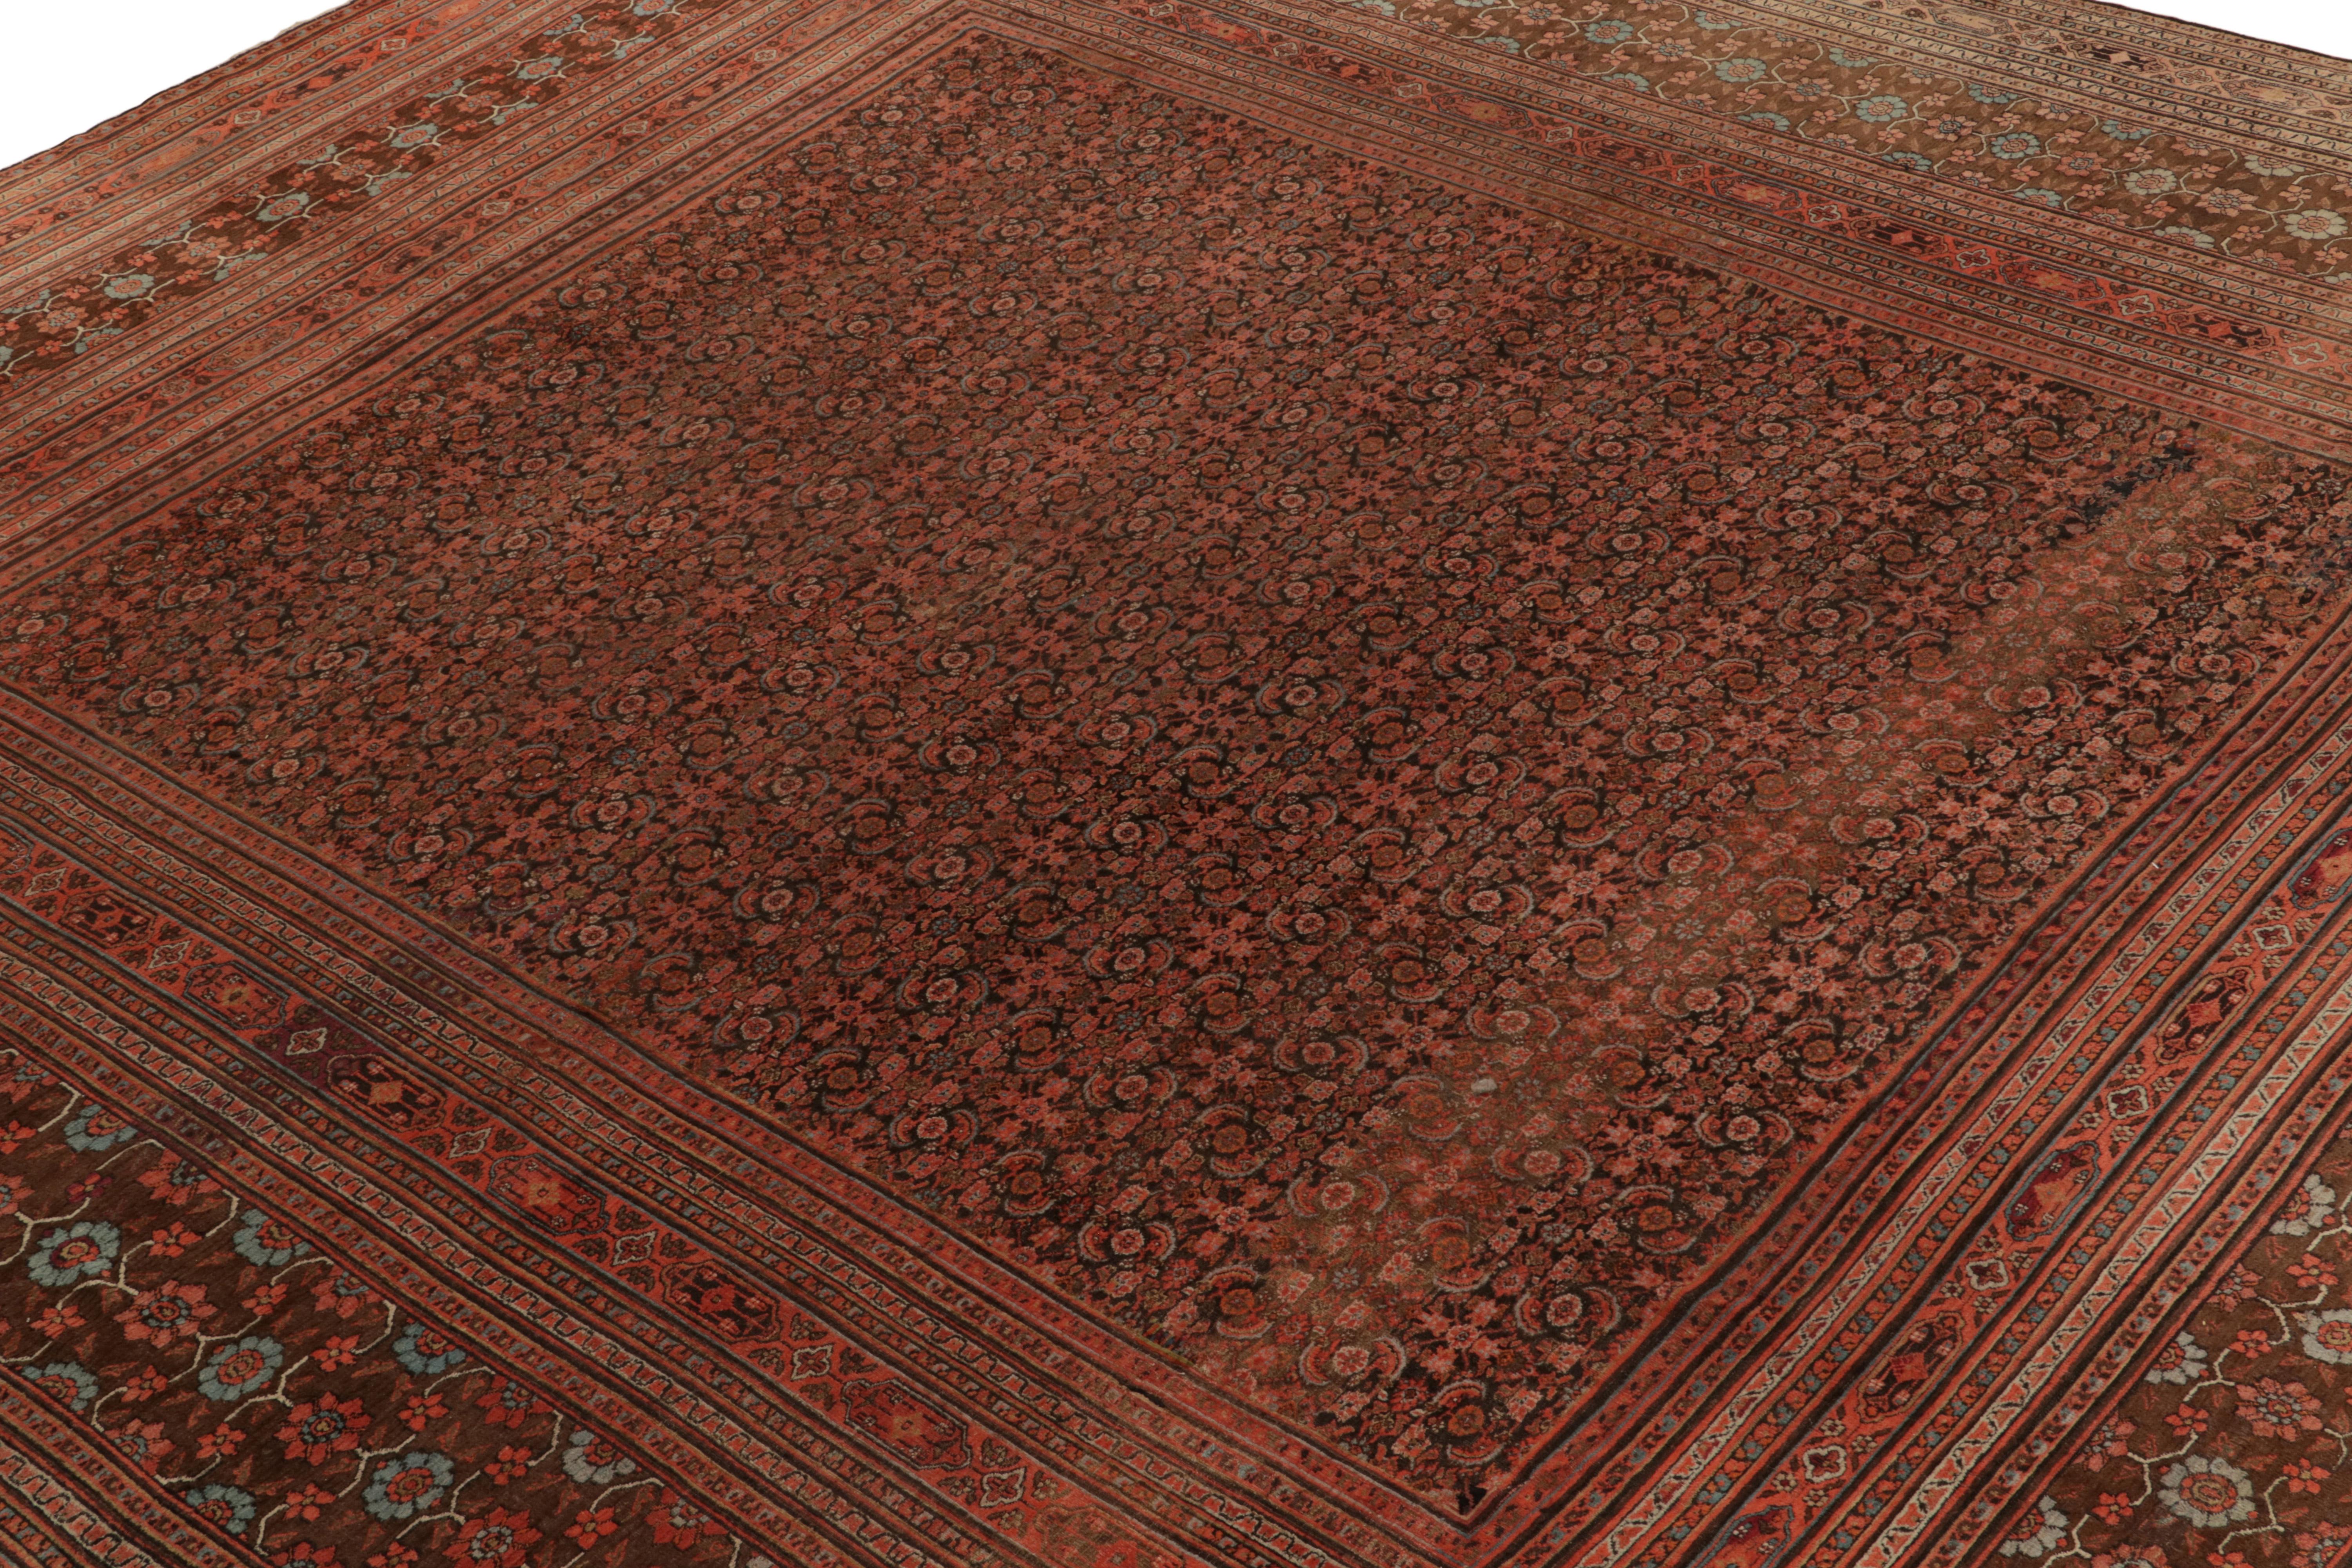 Hand-Knotted Antique Doroksh Rug in Red Brown & Blue Herati Floral Pattern by Rug Kilim For Sale